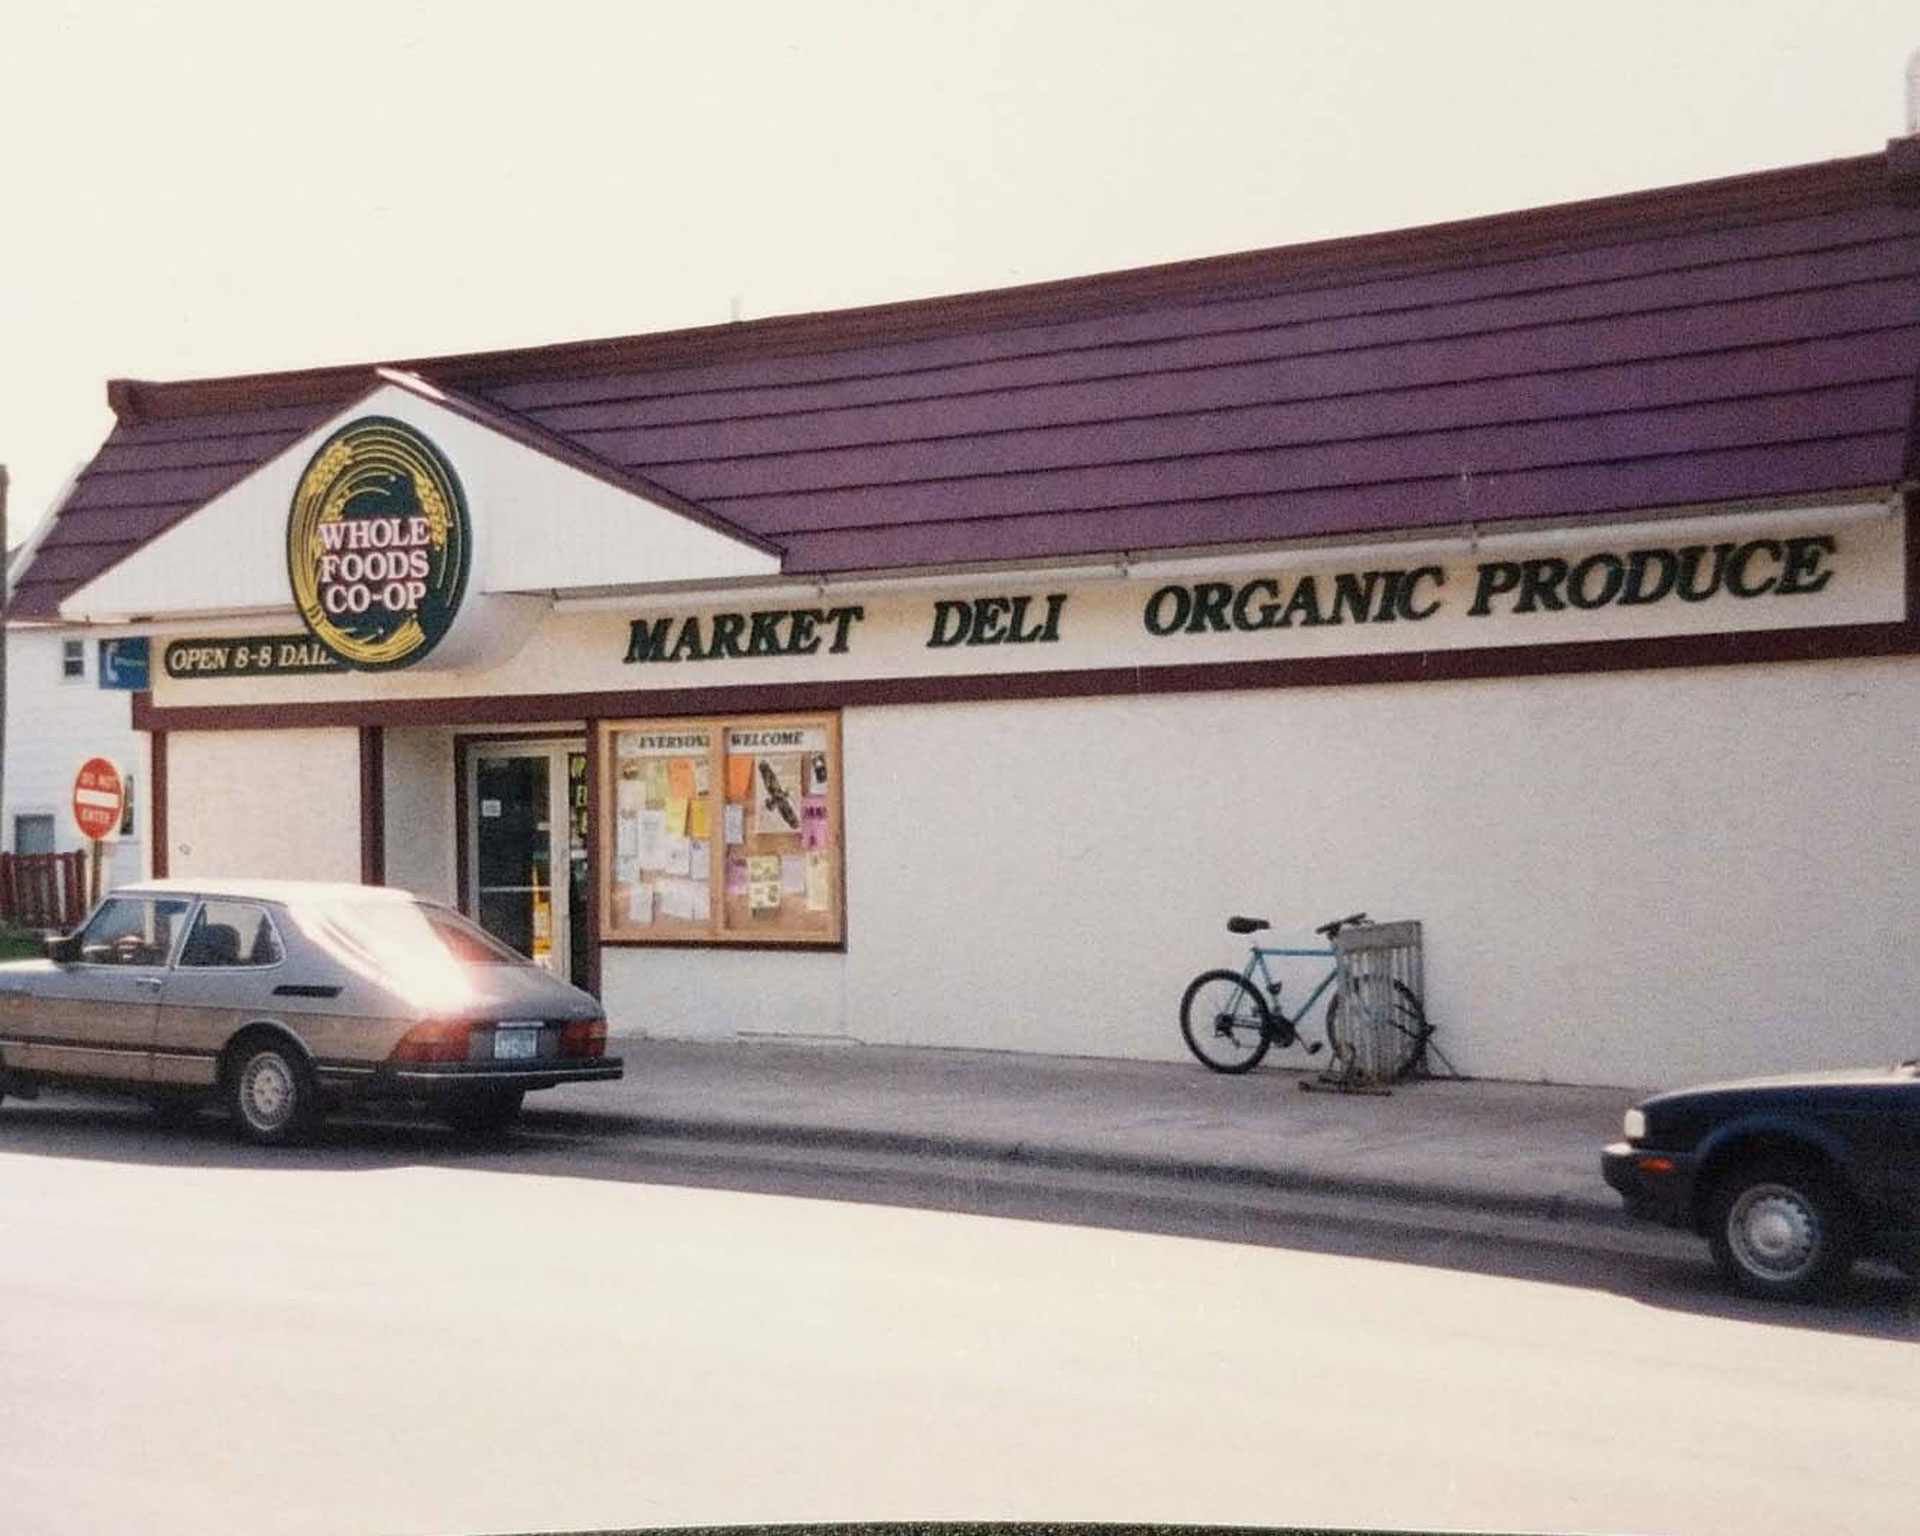 A vintage photo of a Whole Foods Co-op store in Duluth, MN with a maroon-roofed building. Signs read 